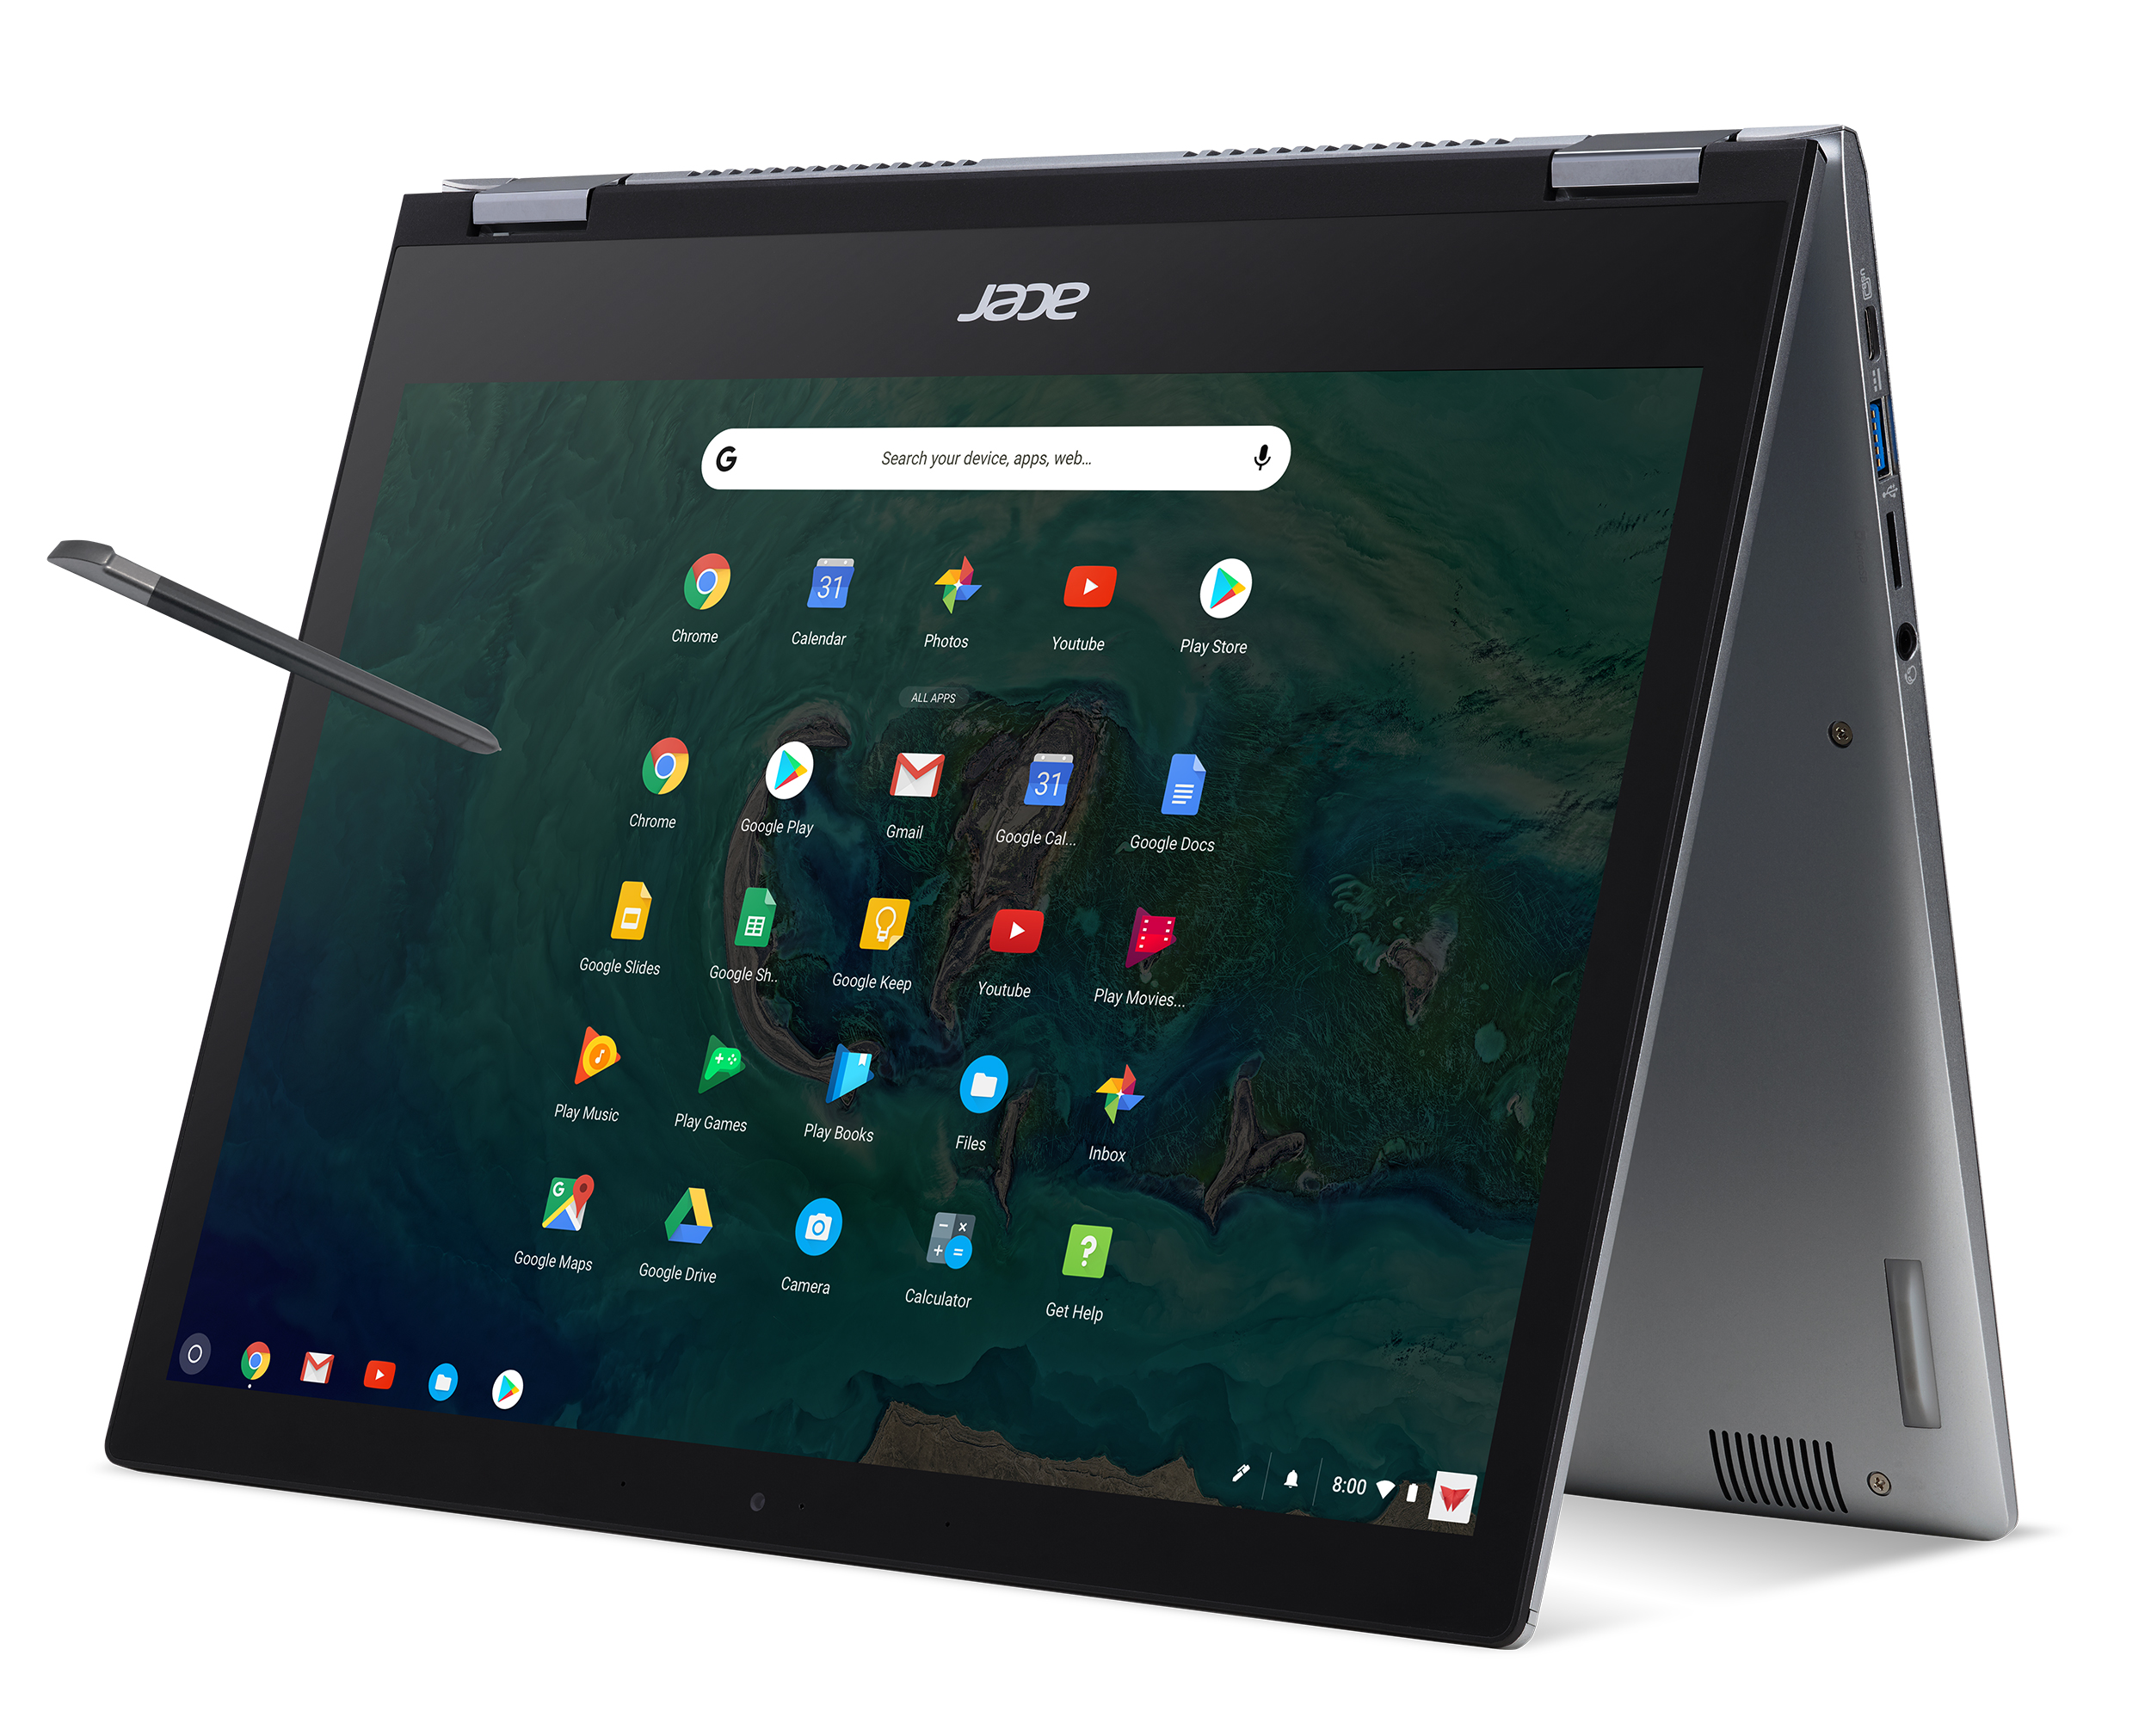 The best touchscreen Chromebooks you can buy - Android Authority